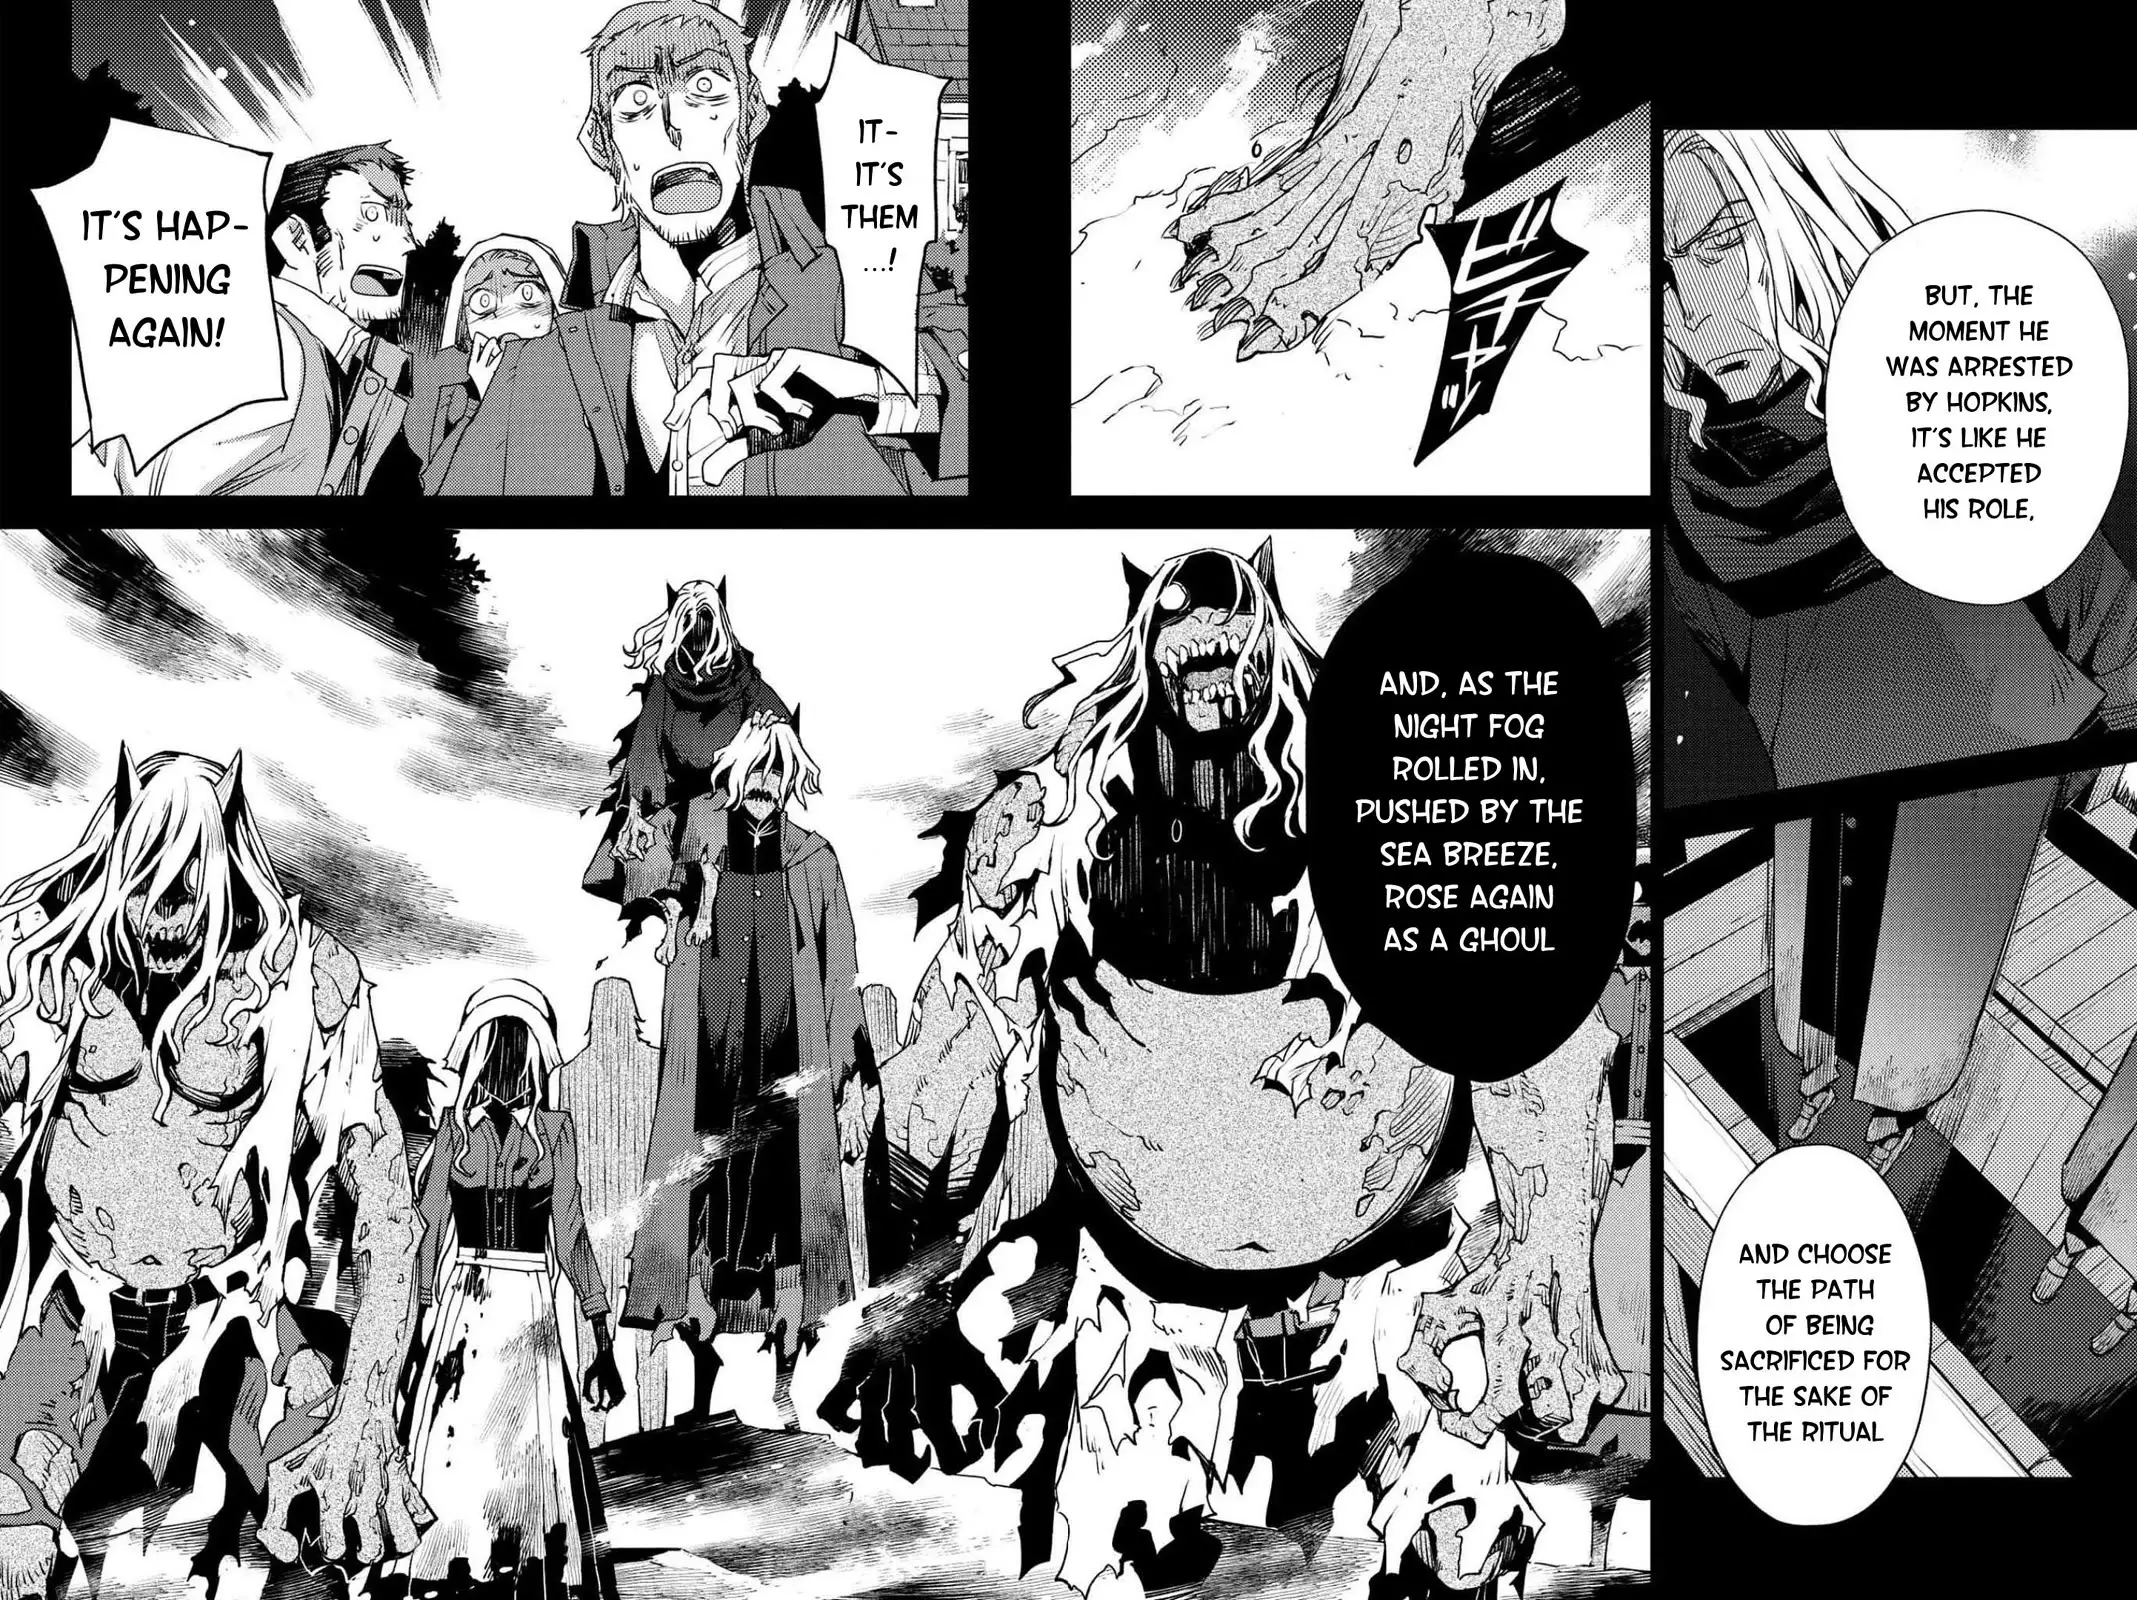 Fate/grand Order: Epic Of Remnant - Subspecies Singularity Iv: Taboo Advent Salem: Salem Of Heresy - 25 page 14-995f4ab8